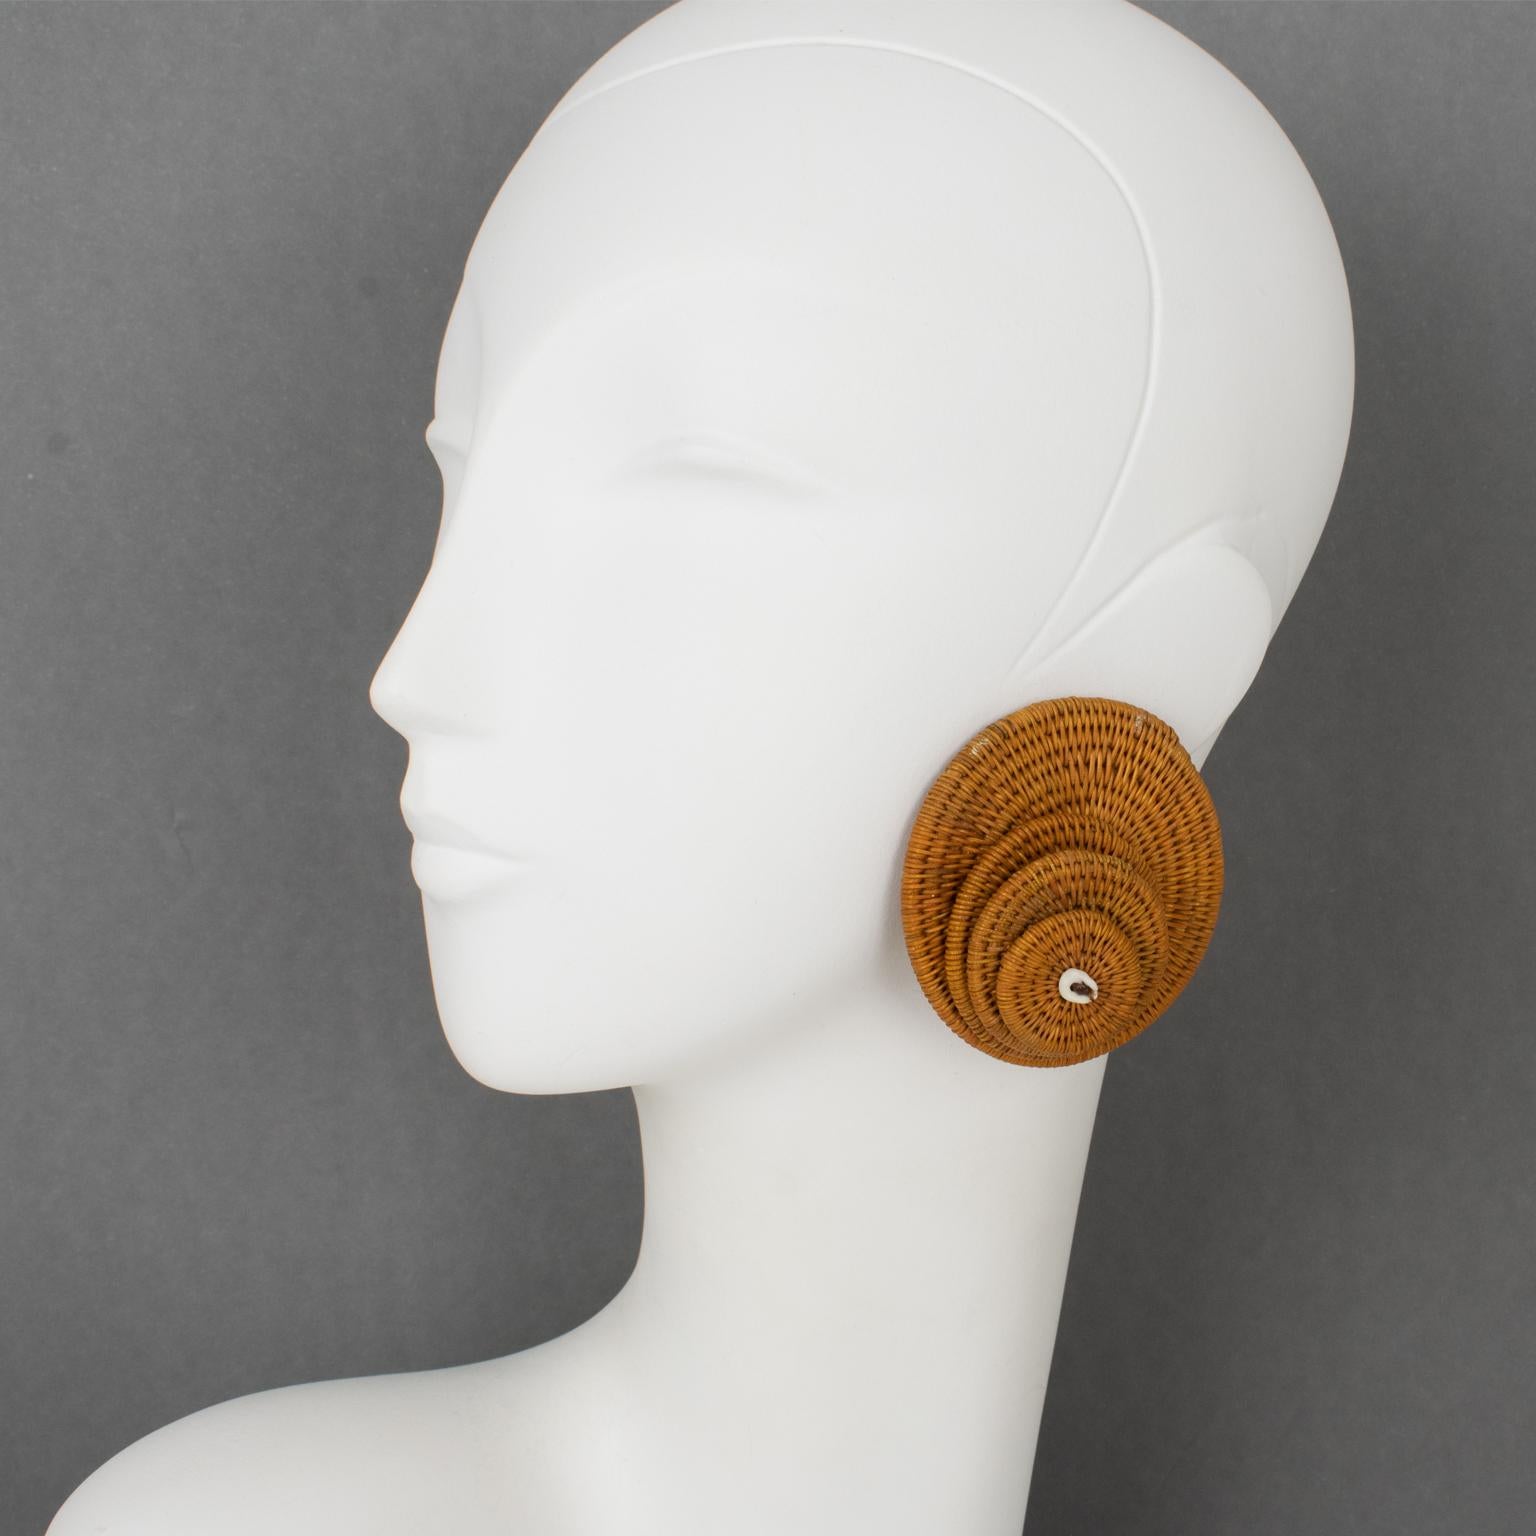 These beautiful clip-on earrings made of wicker or rattan were created and crafted by French designer Francoise Montague during the 1960s. The dimensional shape boasts wicker or rattan woven work with a textured pattern. The four graduated disks are